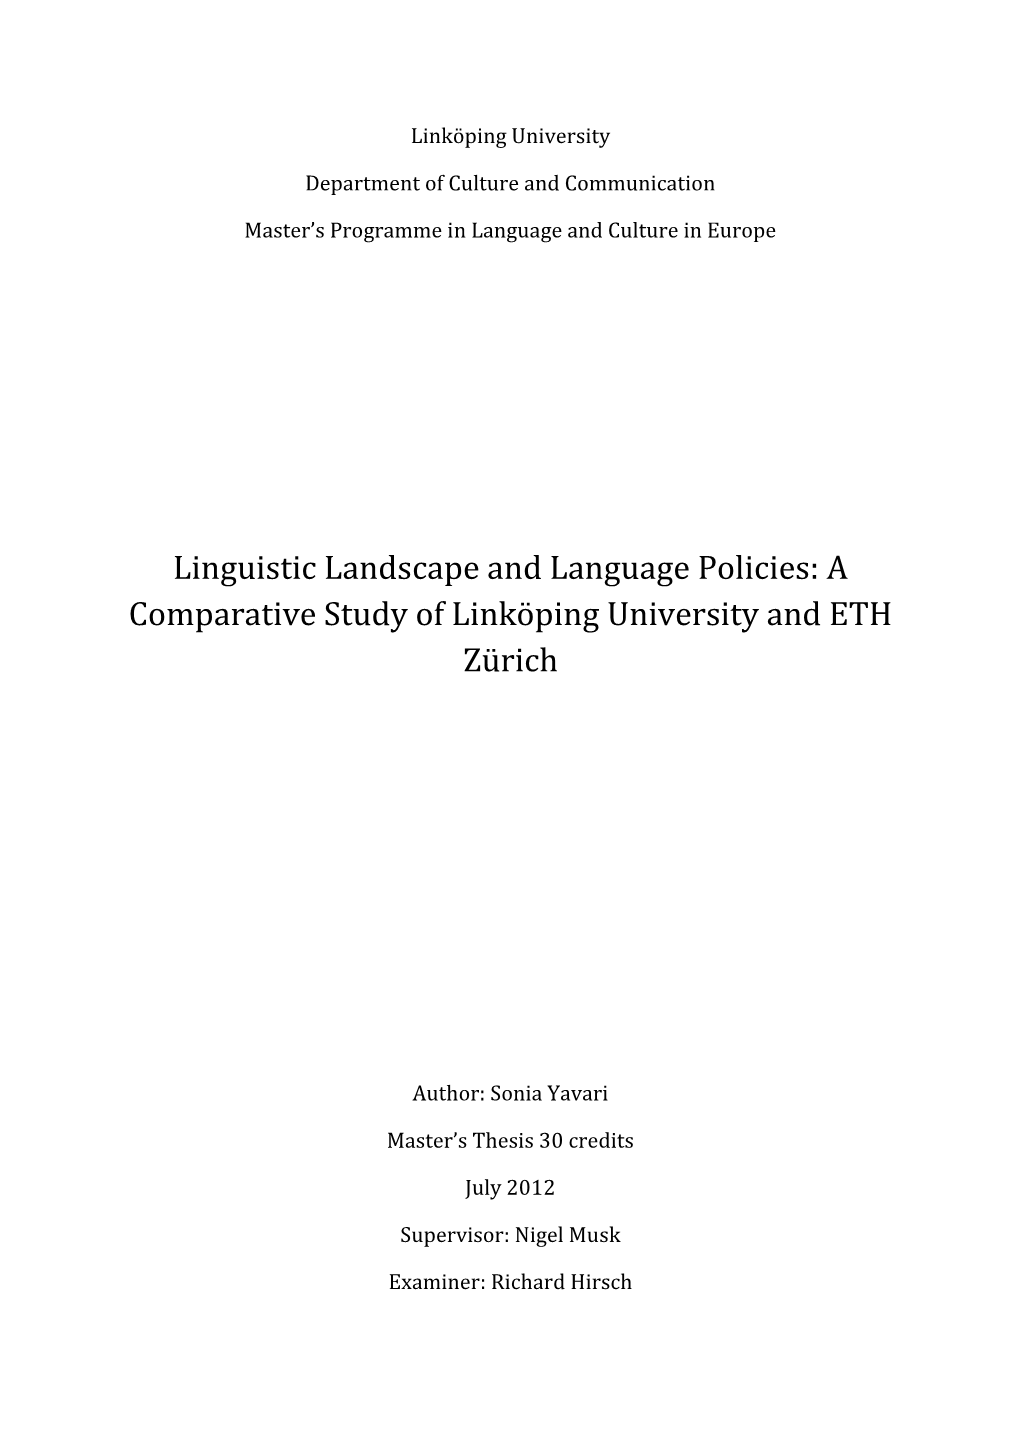 Linguistic Landscape and Language Policies: a Comparative Study of Linköping University and ETH Zürich